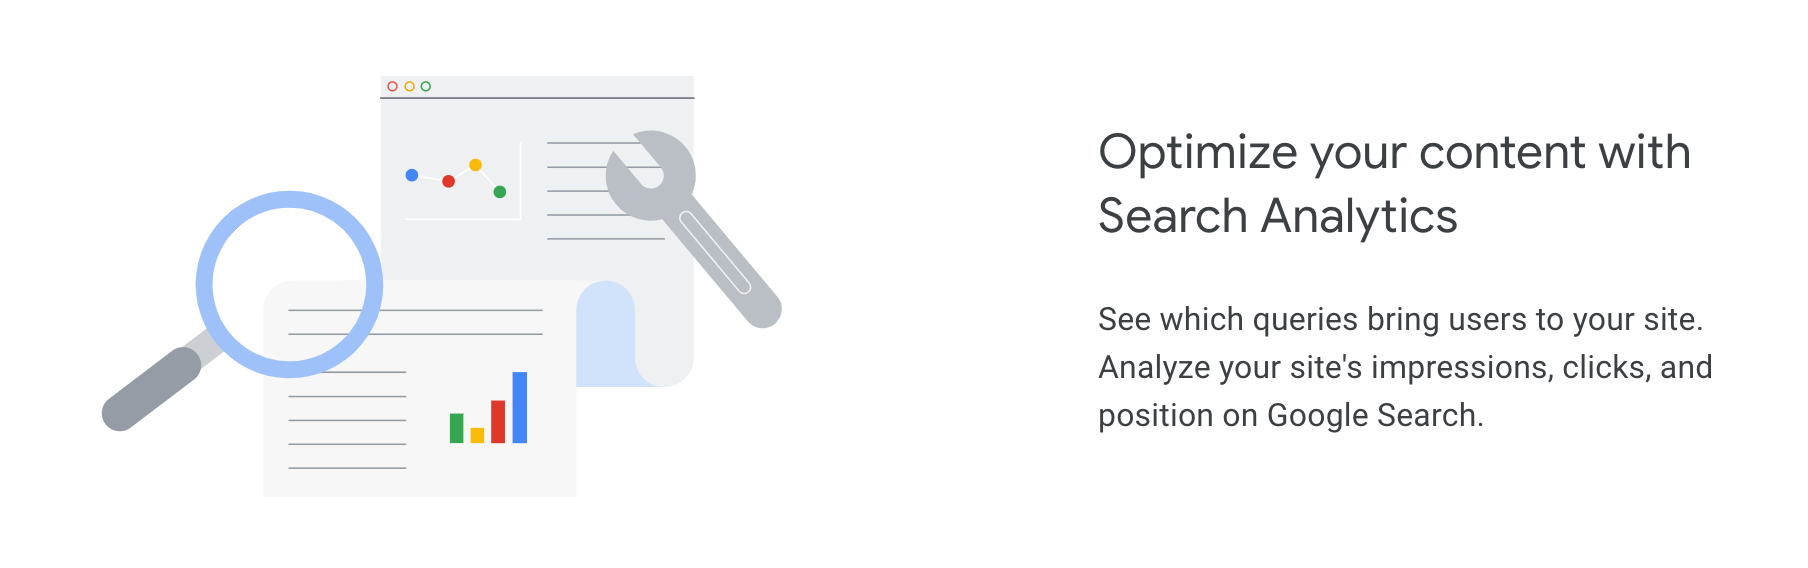 Google Search Console image of analytics